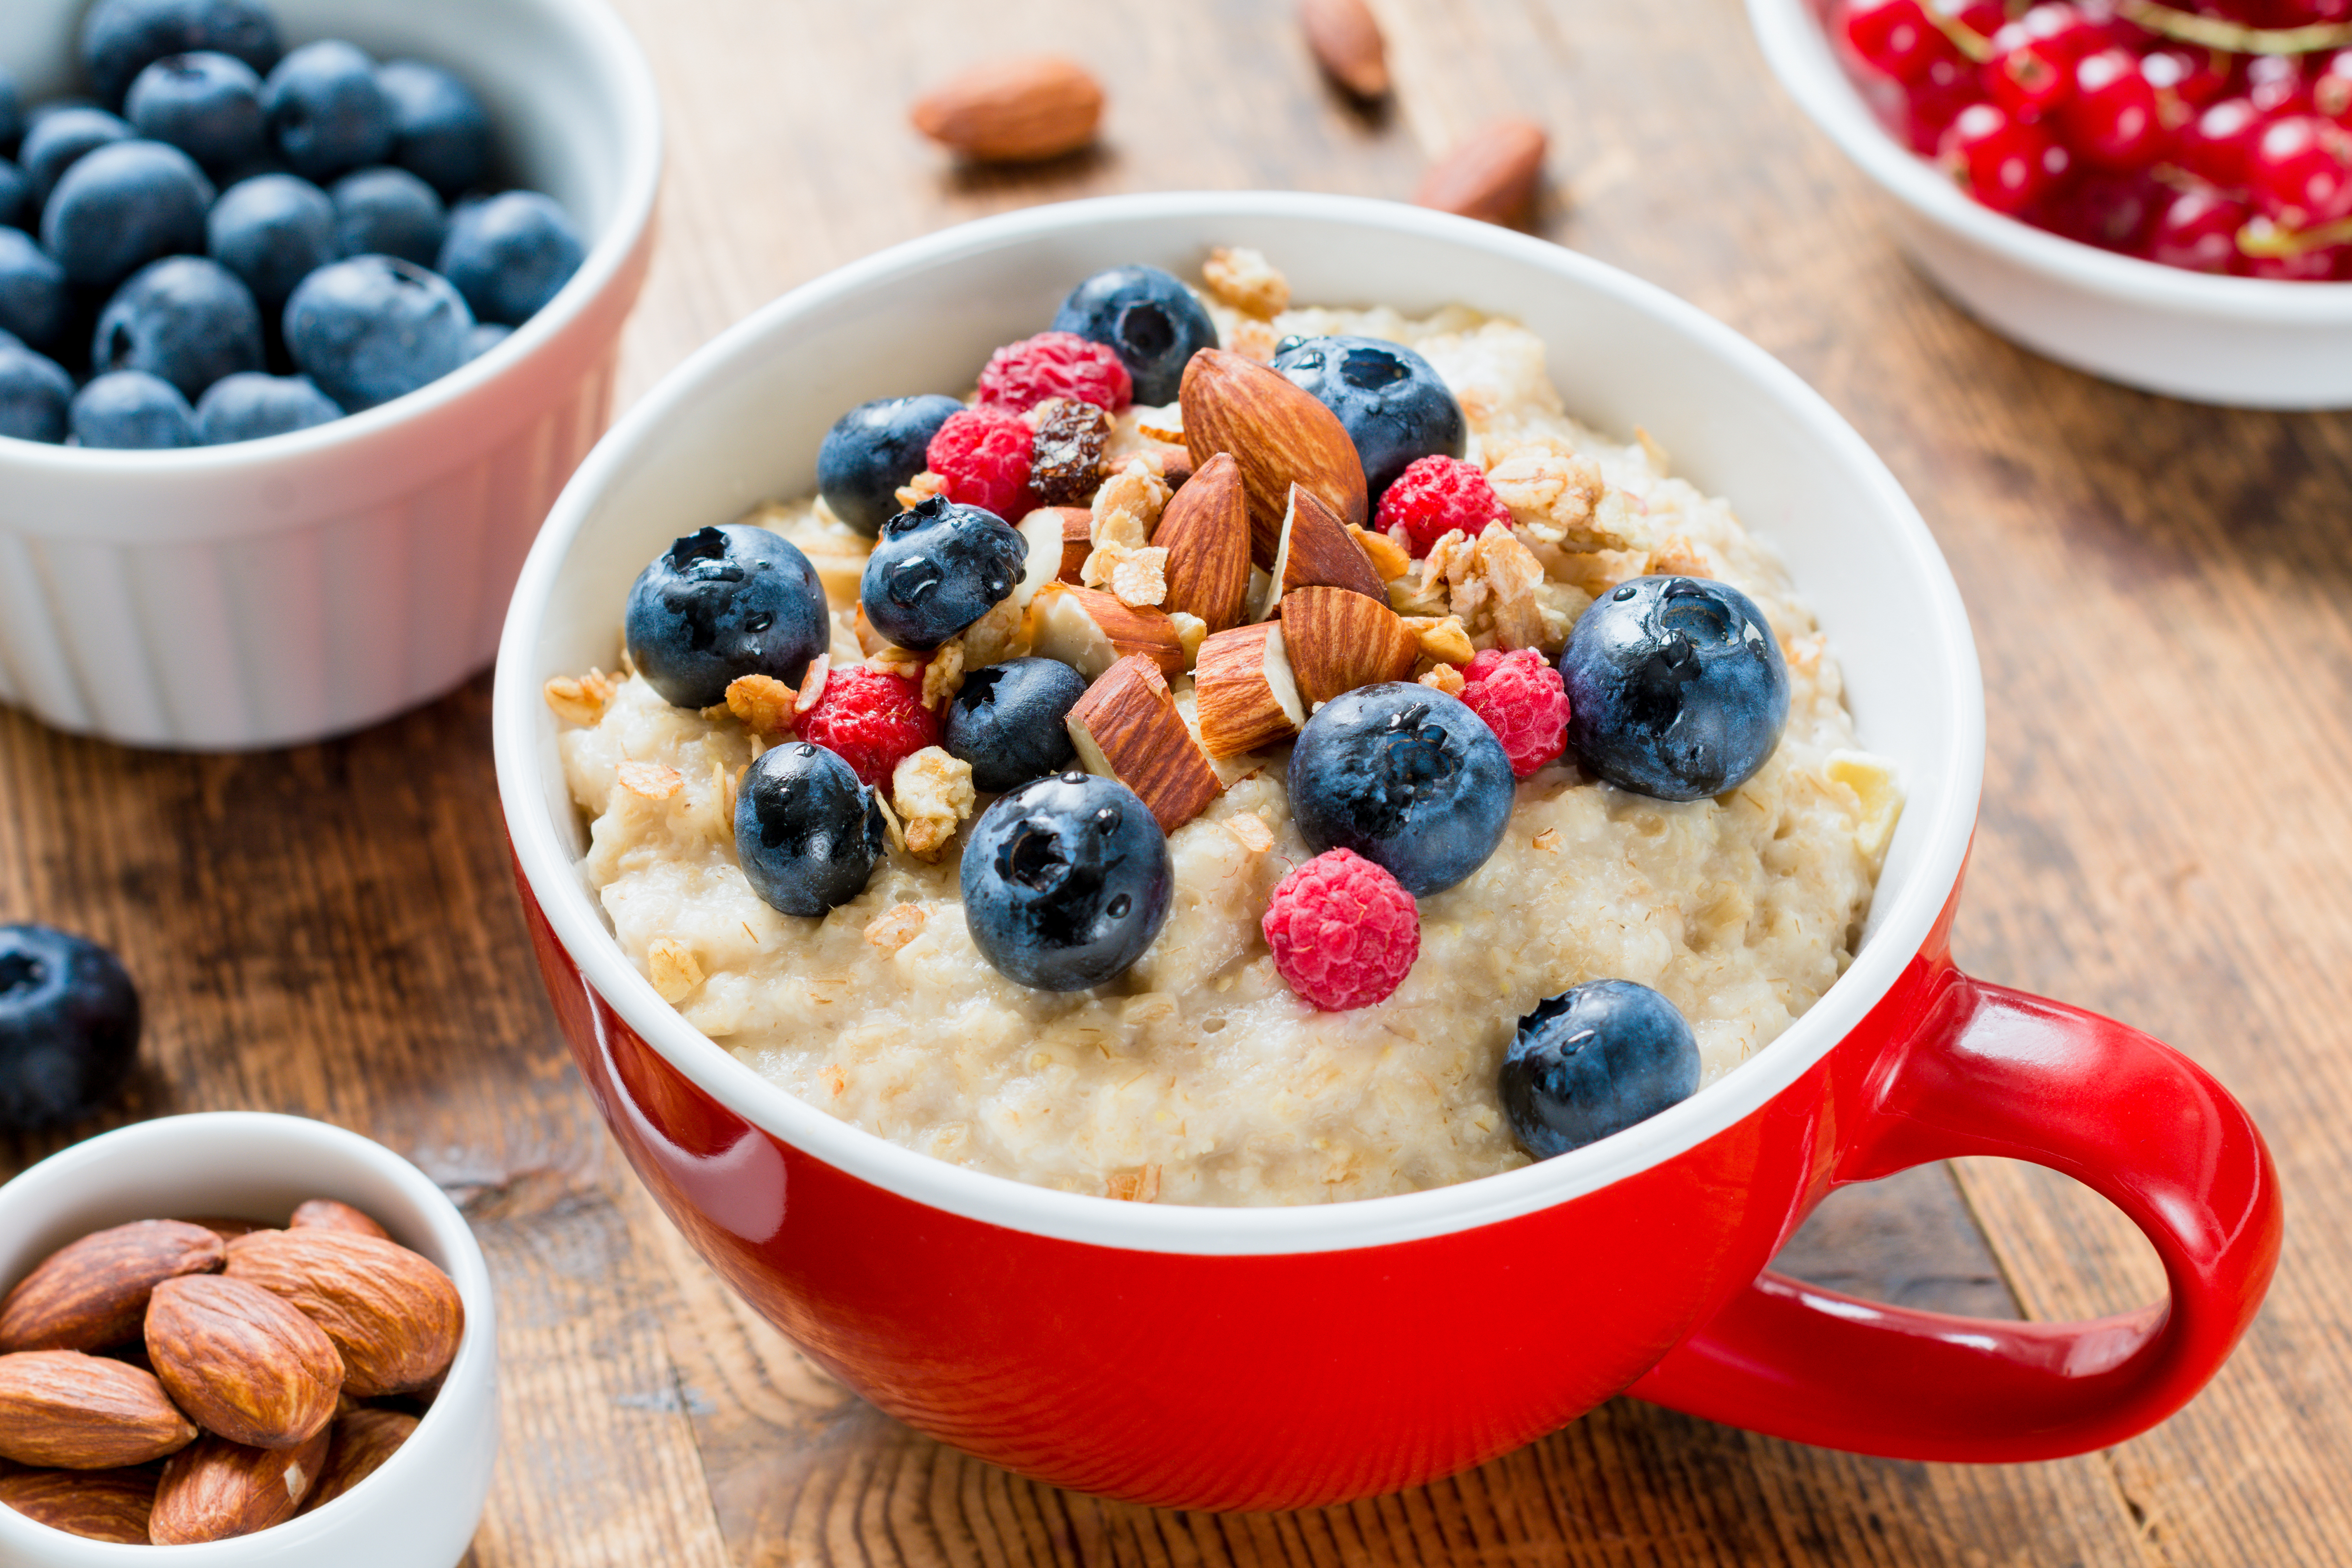 https://www.pcrm.org/sites/default/files/Oatmeal%20and%20Berries.jpg